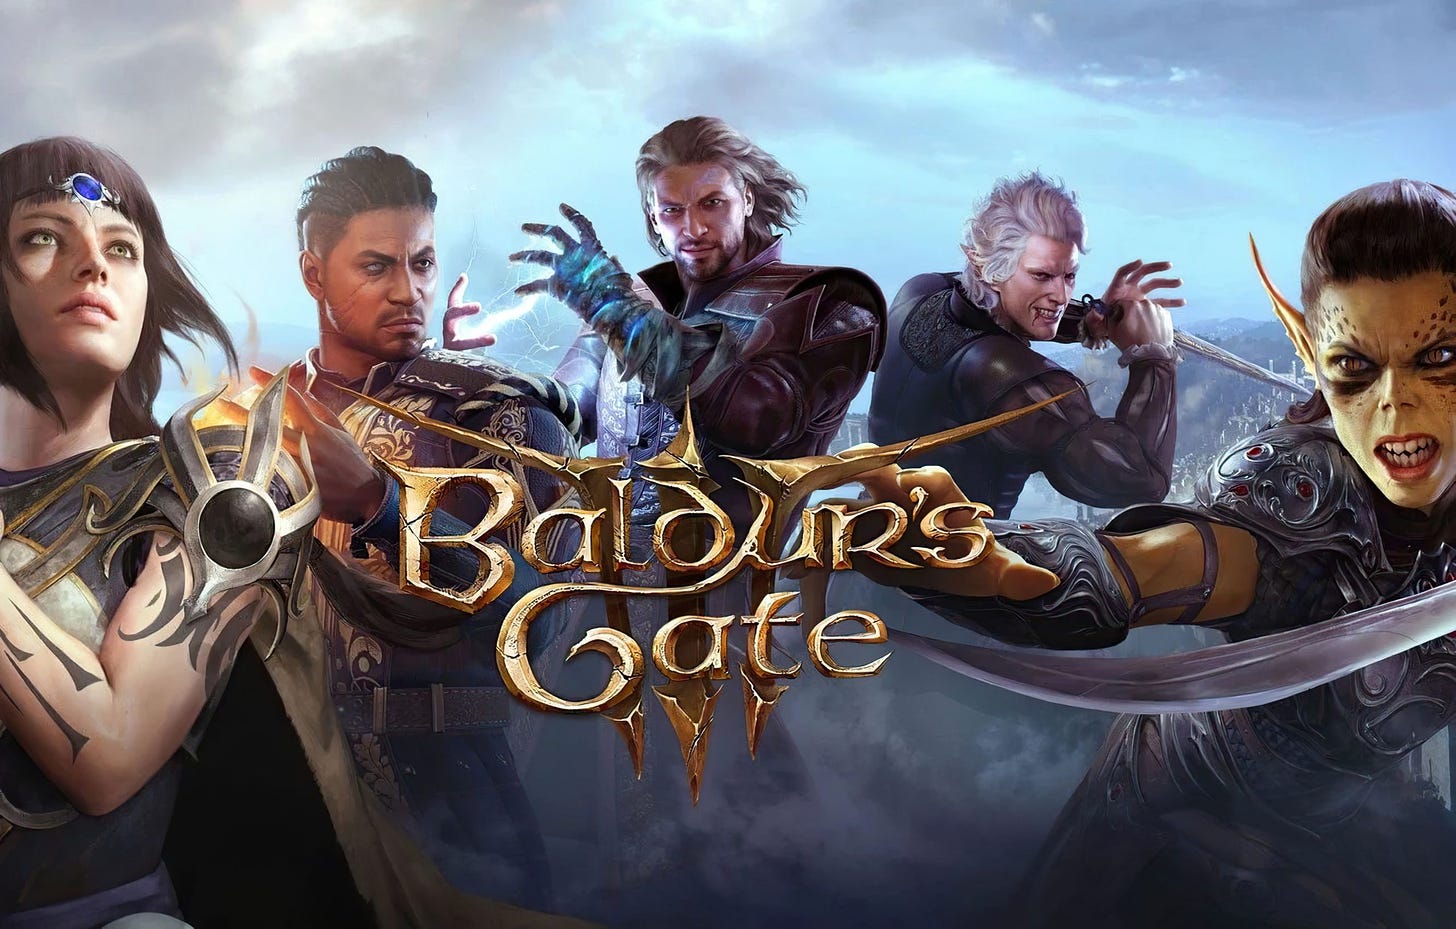 Baldur's Gate 3 game release poster. Shadowheart, Wyll, Gale, Astarion, and Lae'zel from left to right.